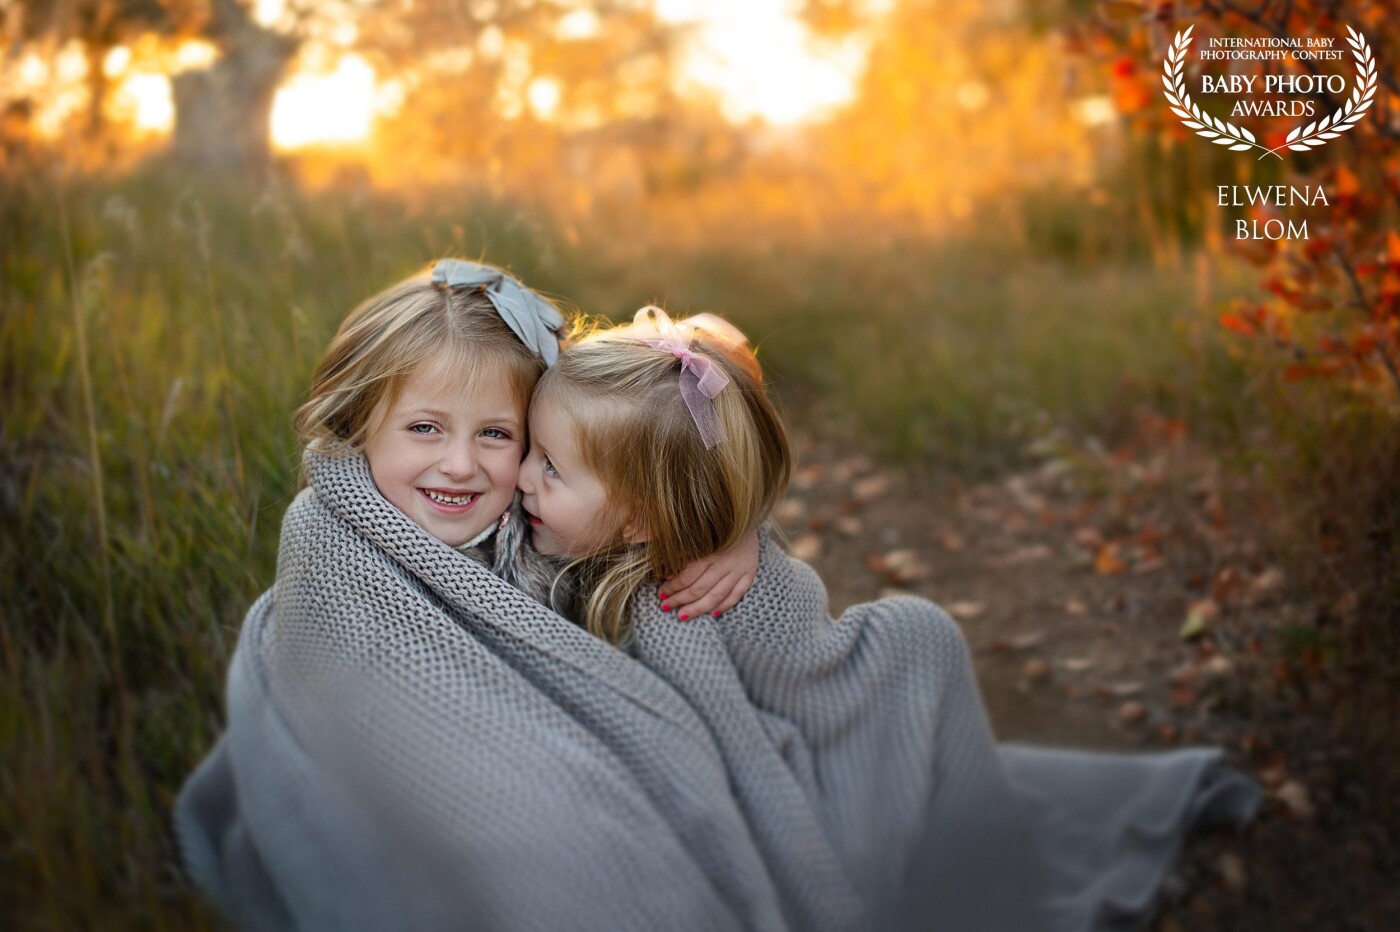 Sisterly love all wrapped up in this cute bundle. The sun was absolutely gorgeous this afternoon and the girls had had enough of their family session at this point but I’m glad we could keep it together long enough for one last shot to capture the atmosphere (and their close bond) of this crisp Fall afternoon. 